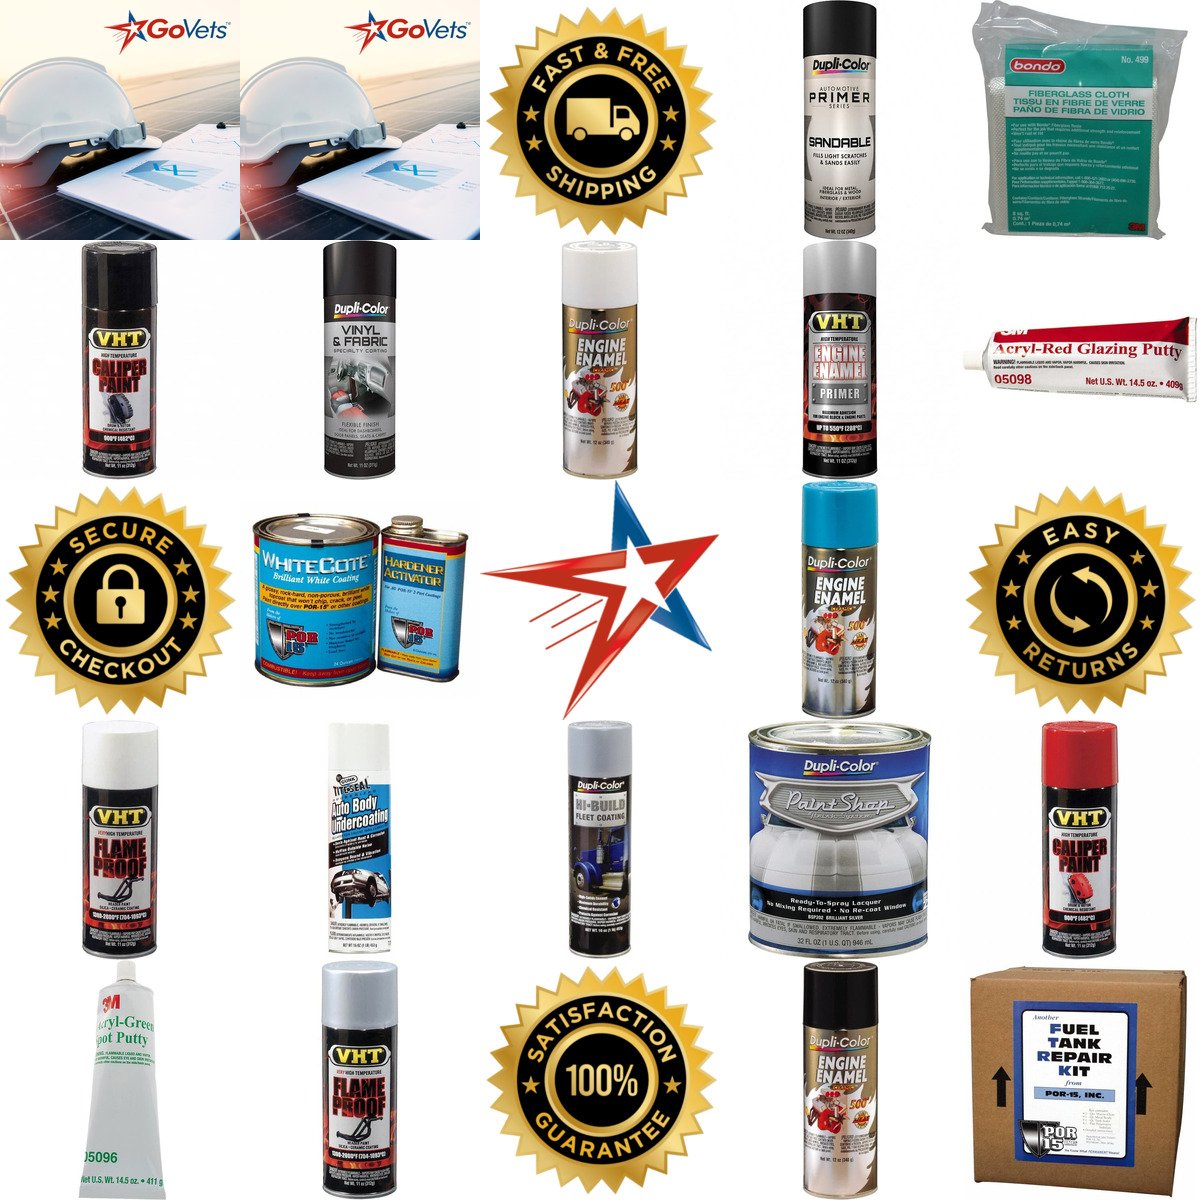 A selection of Automotive Primer Paints and Coatings products on GoVets